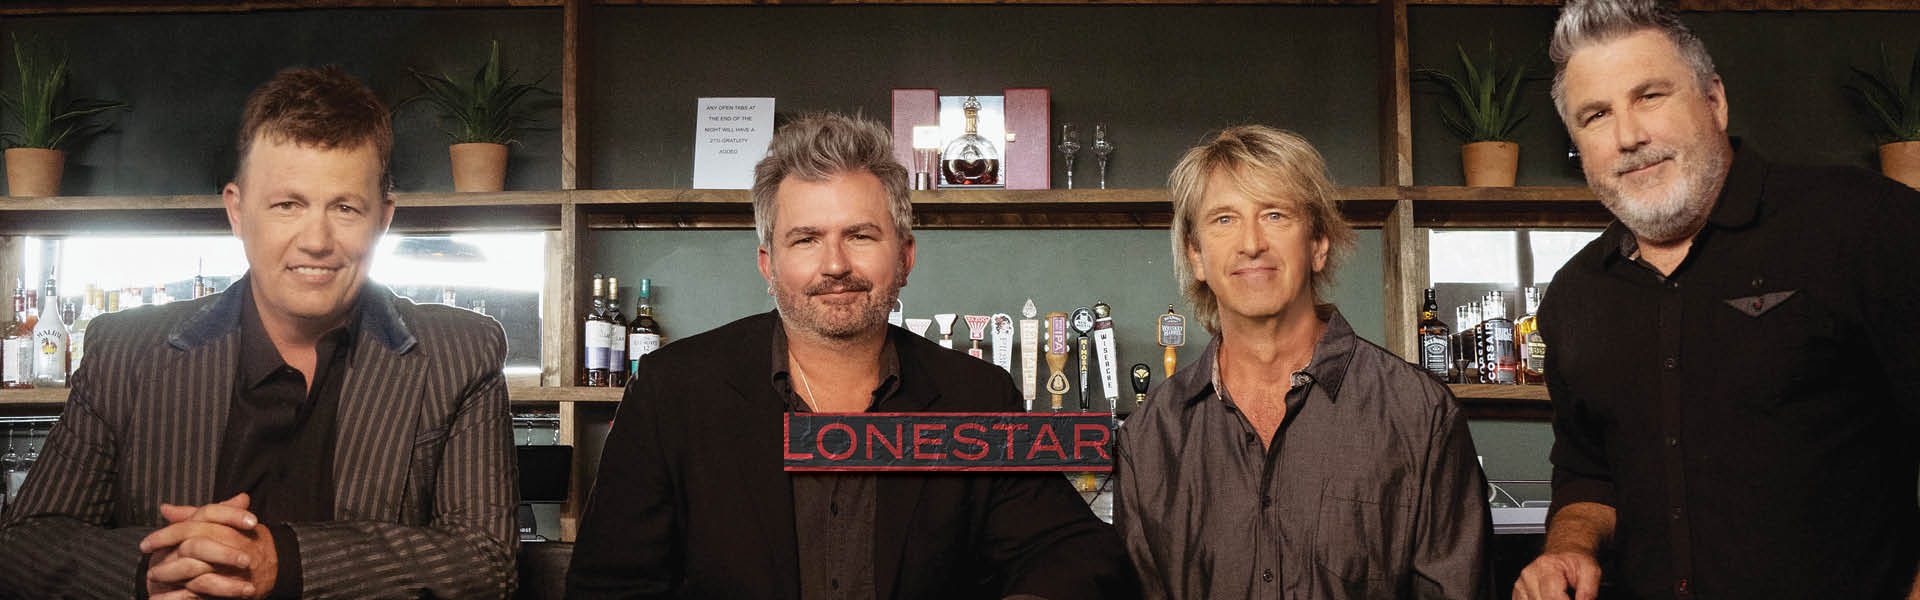 Picture of music group Lonestar